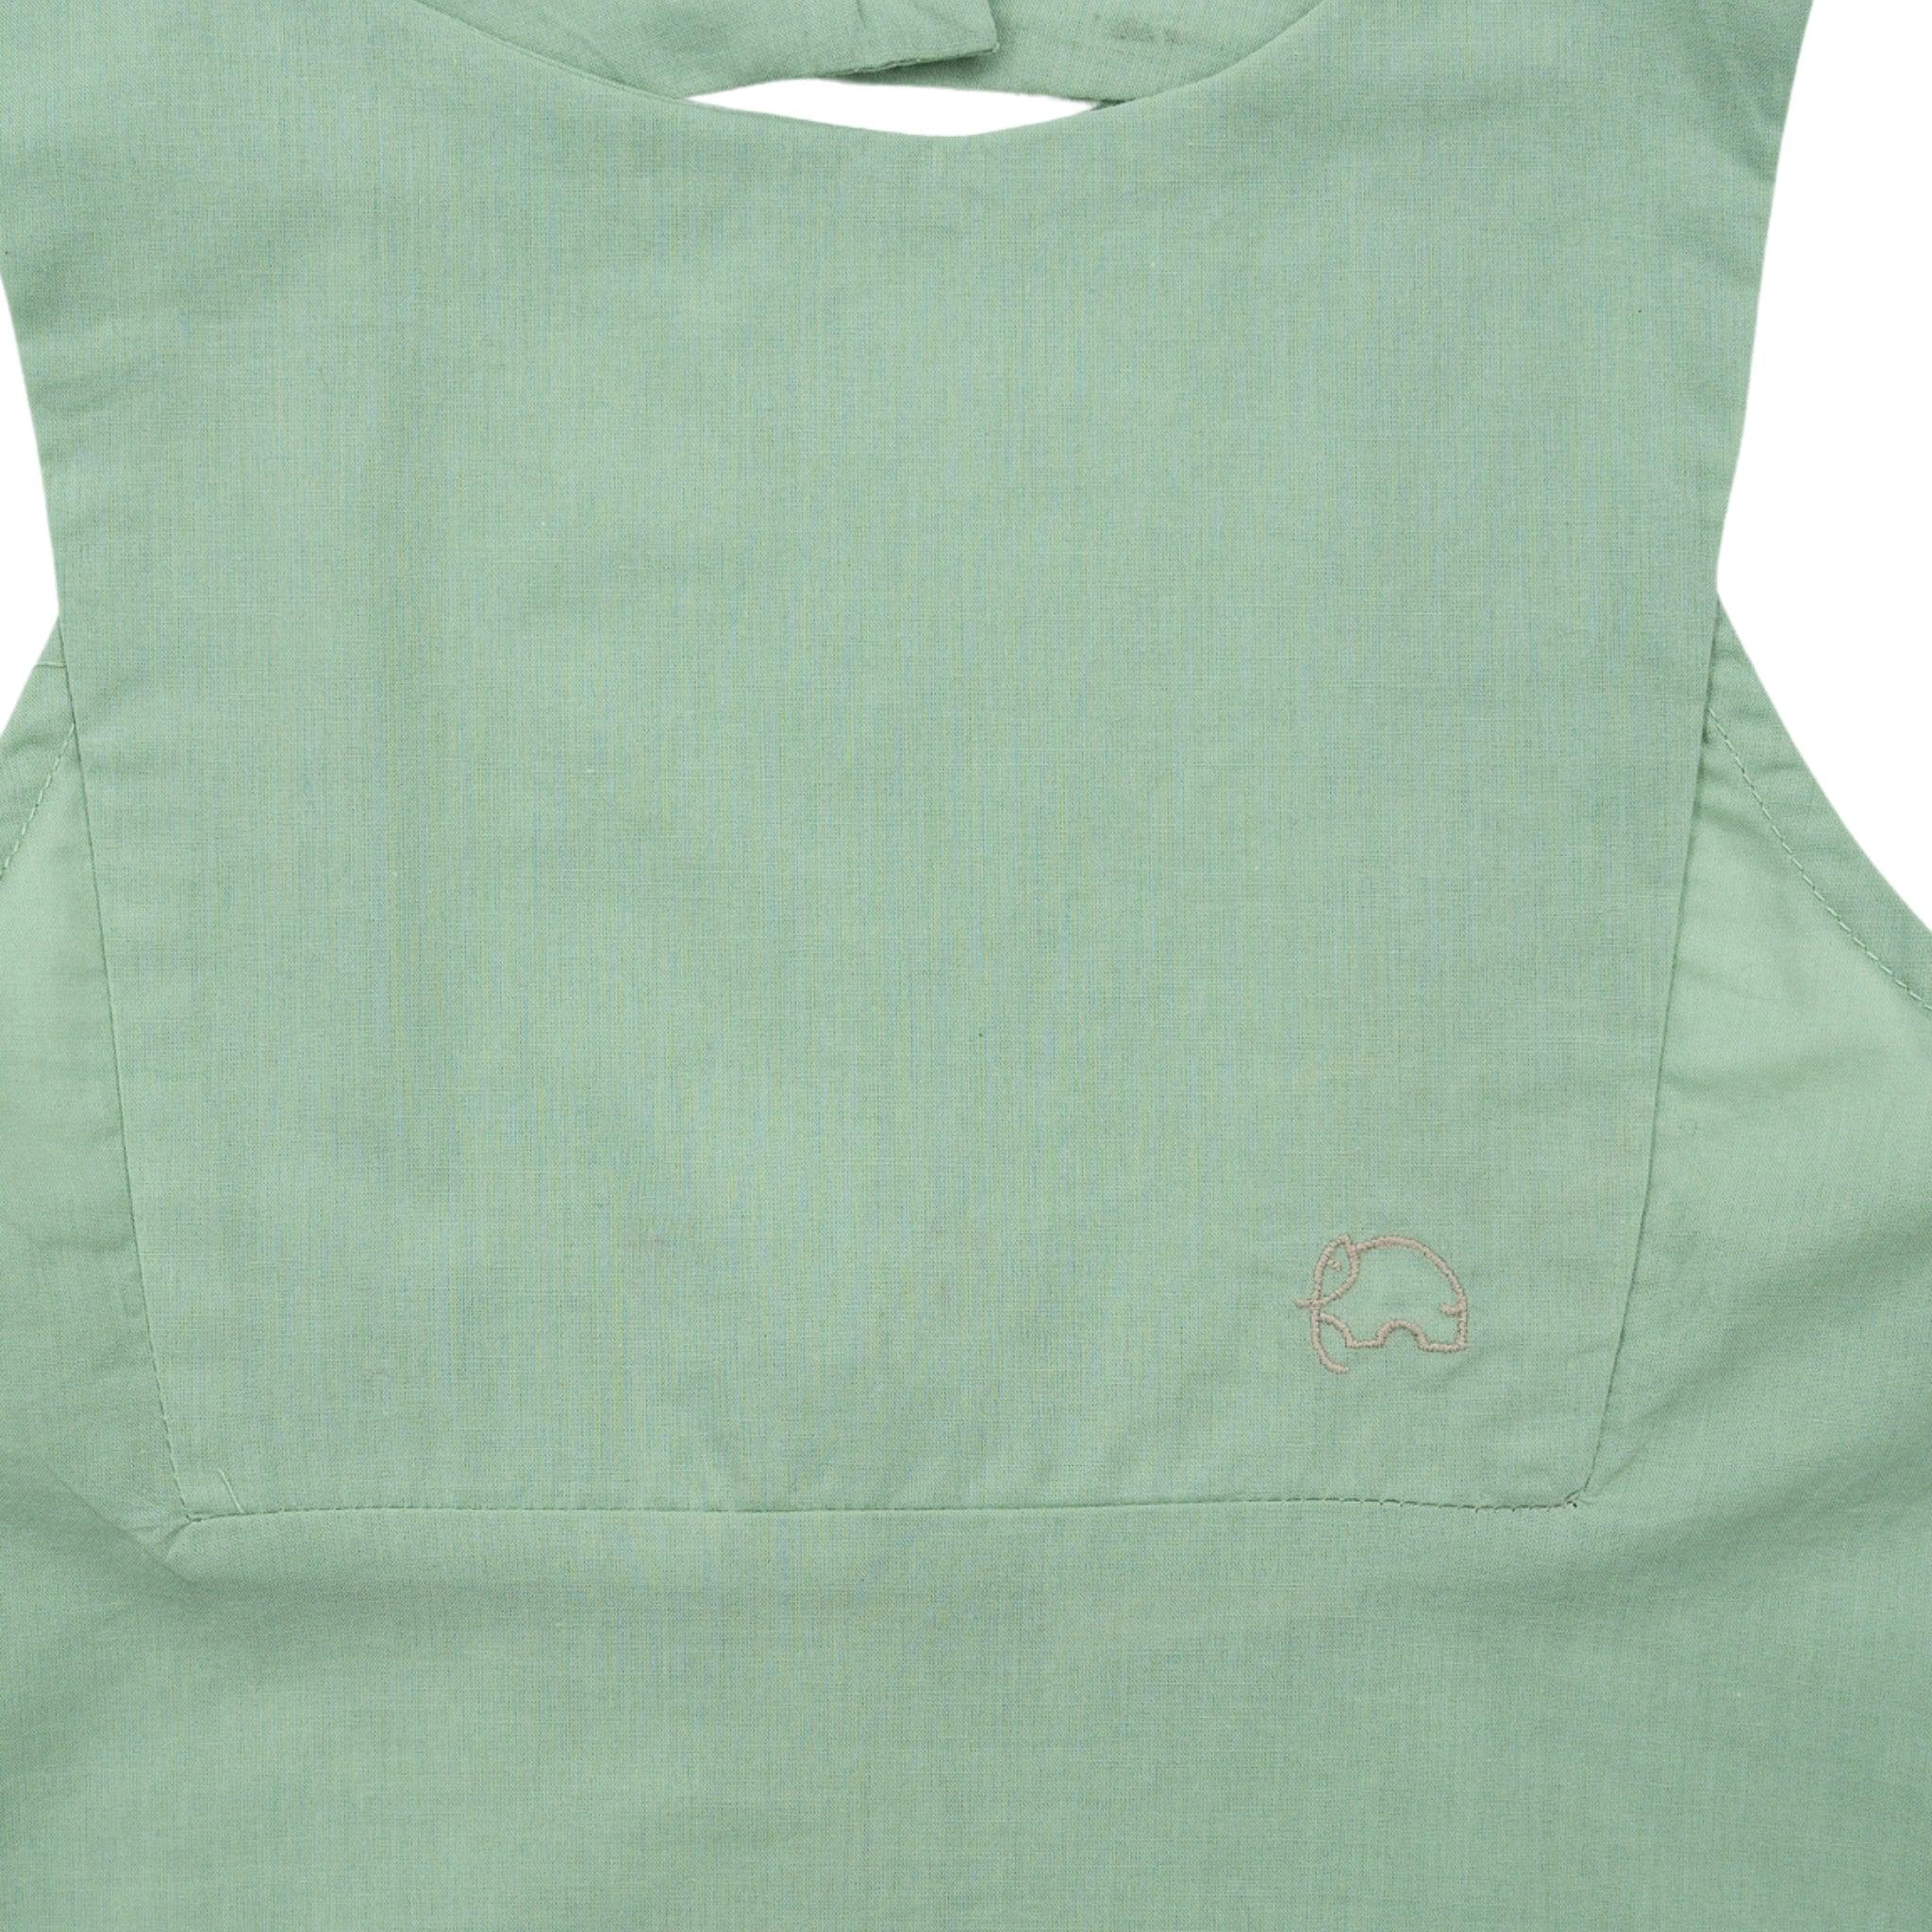 Smoke Green Cotton Bib Neck Top for kids with a small stitched elephant design near the bottom by Karee.